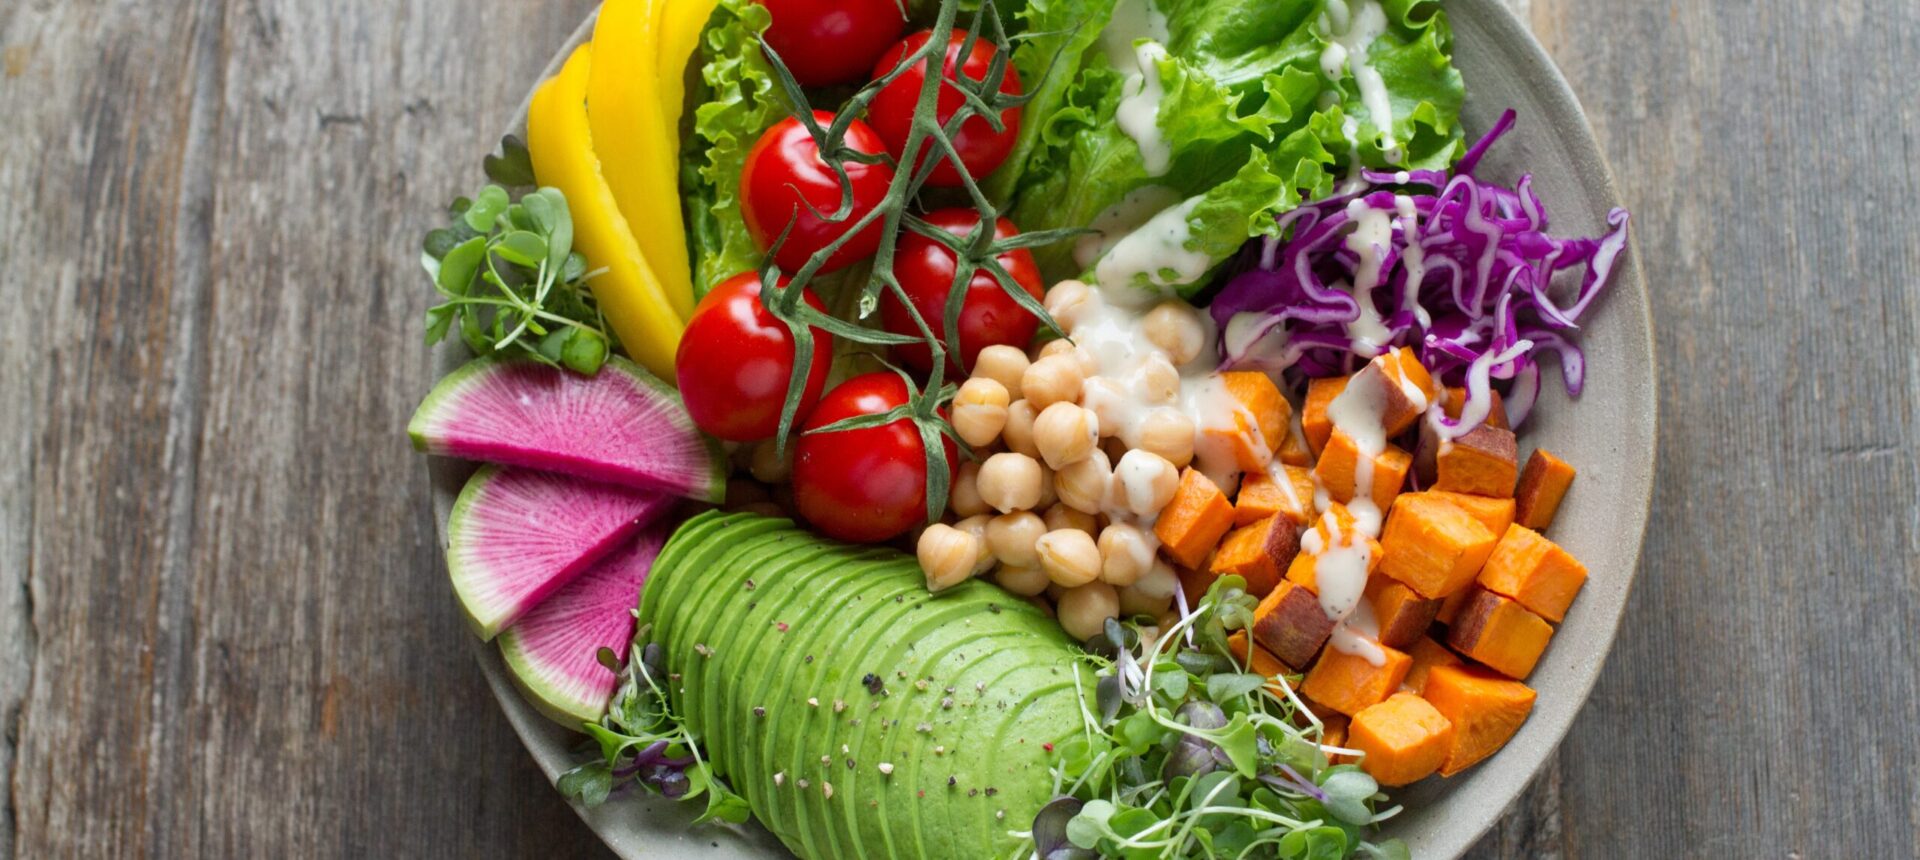 Why You Should Be Putting More Emphasis on Healthy Eating